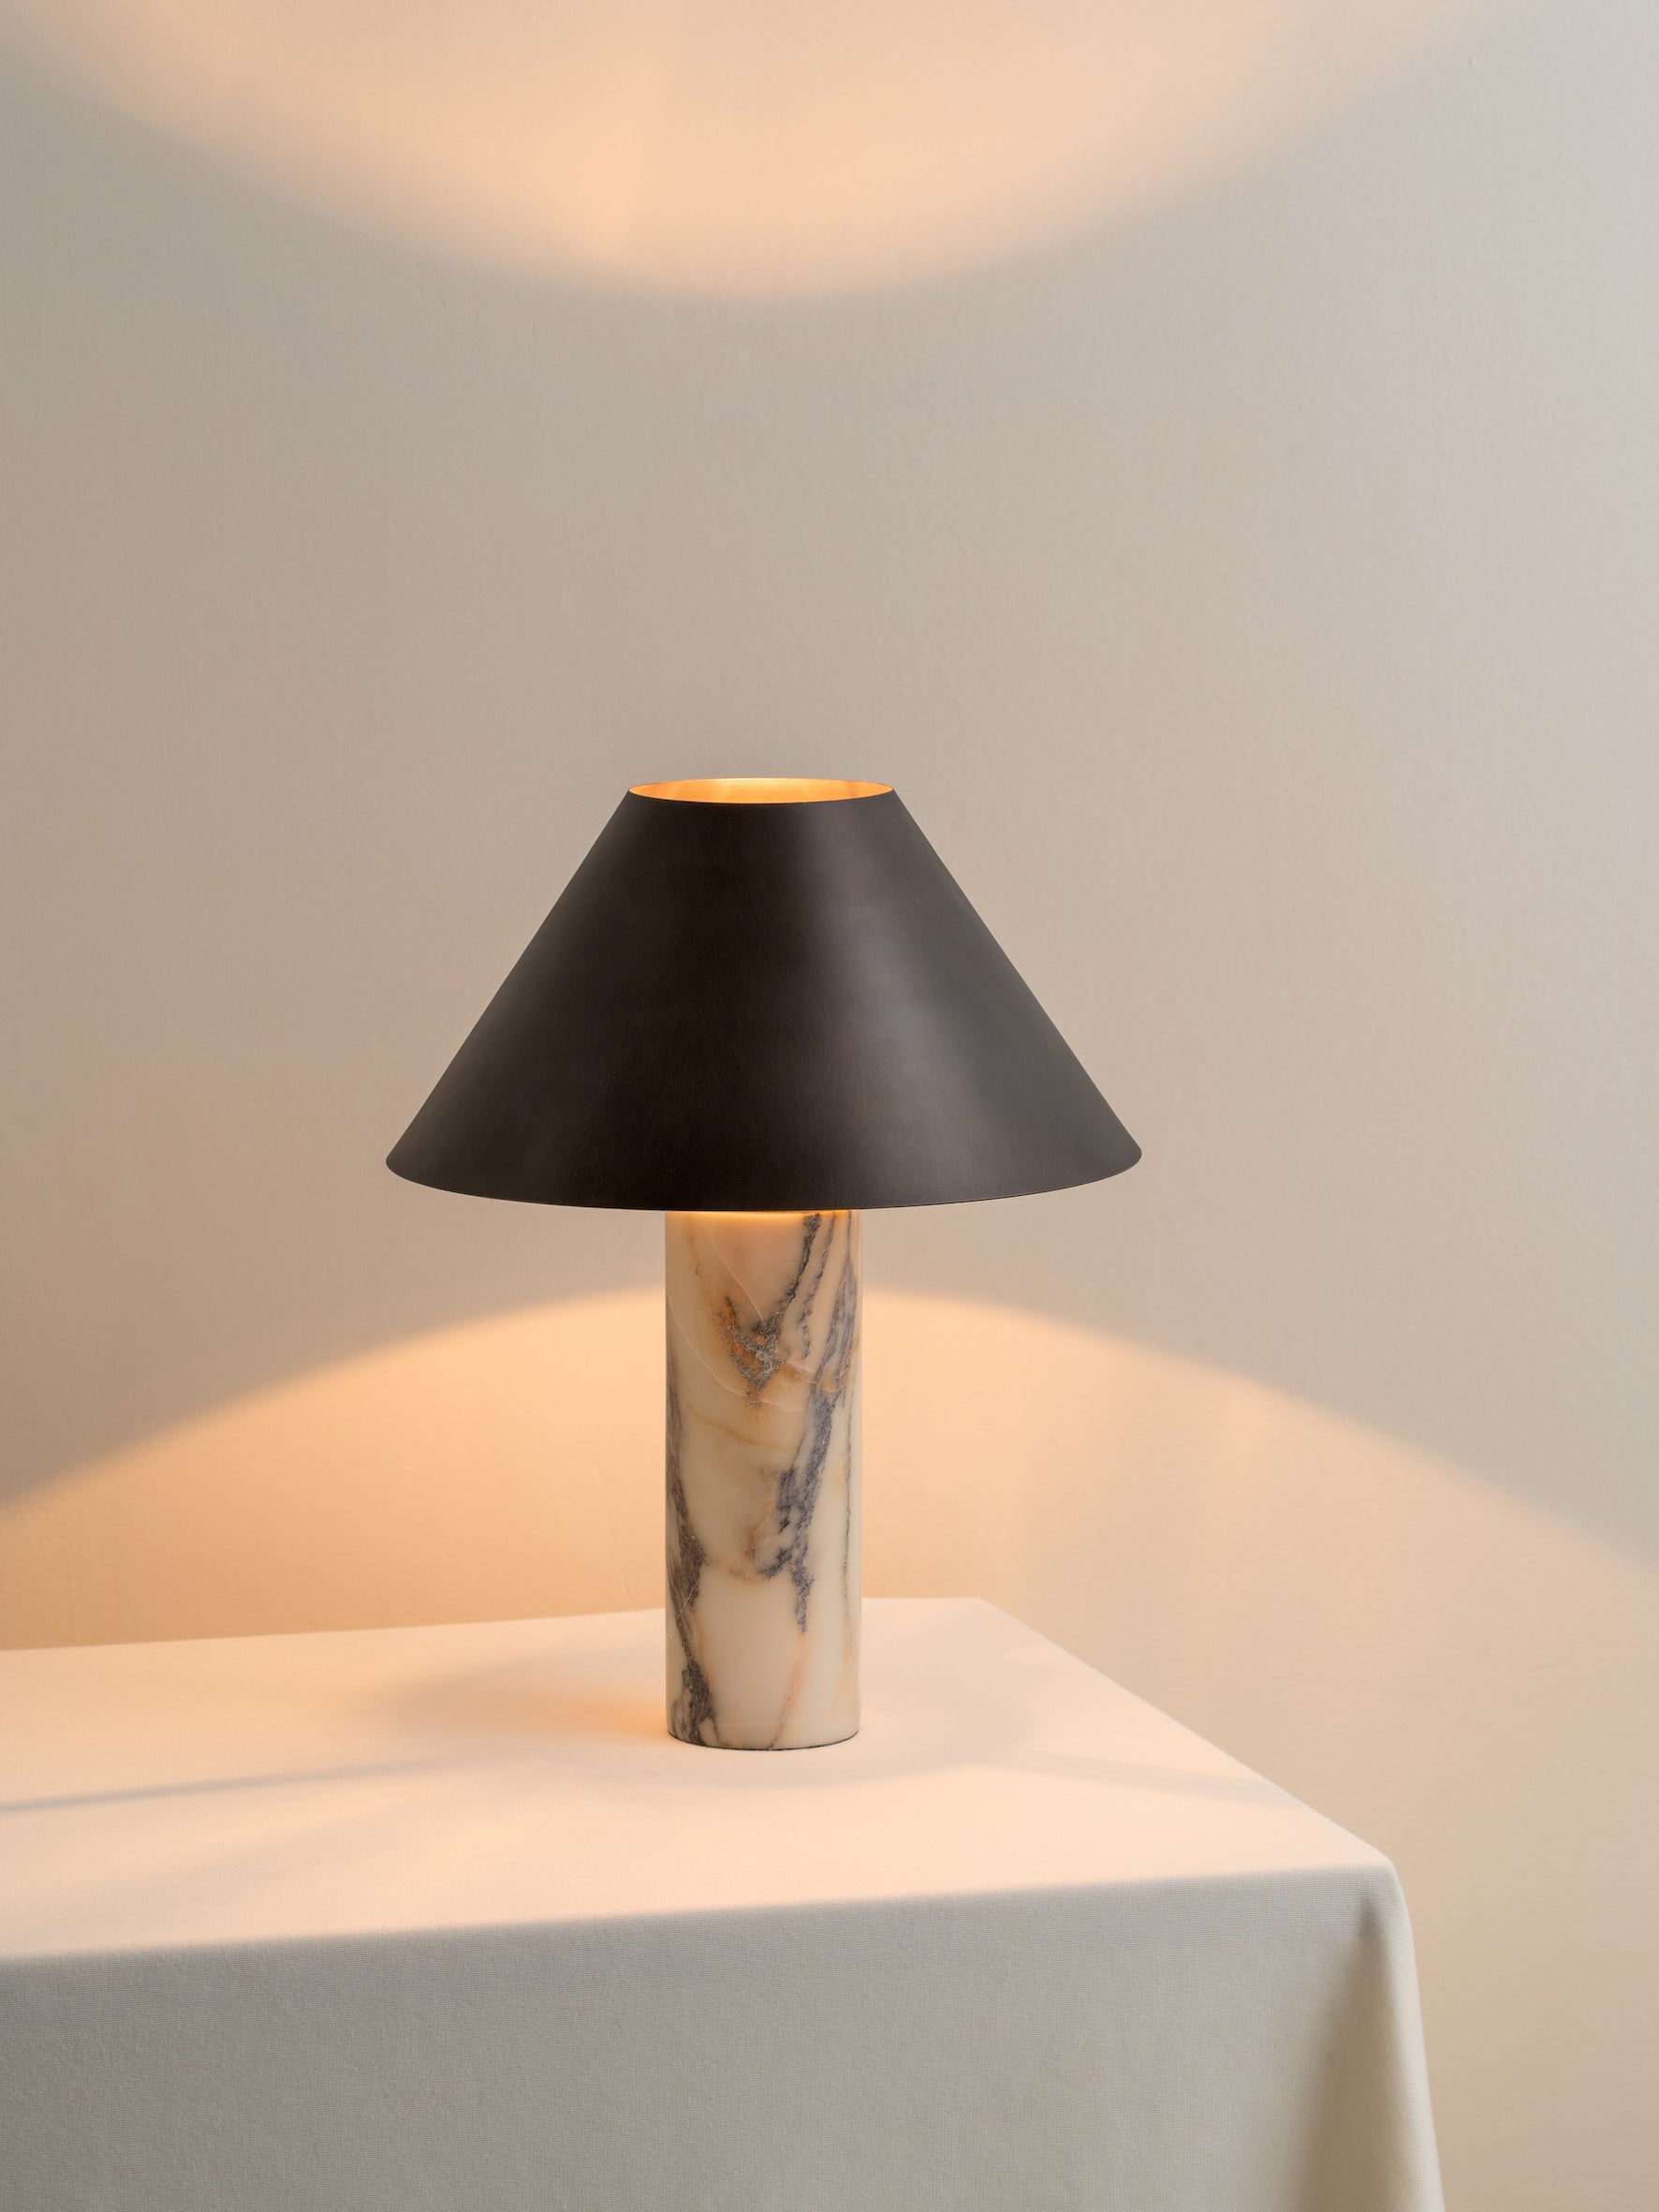 Cline - calacatta viola marble and bronze table lamp | Table Lamp | Lights & Lamps | UK | Modern Affordable Designer Lighting